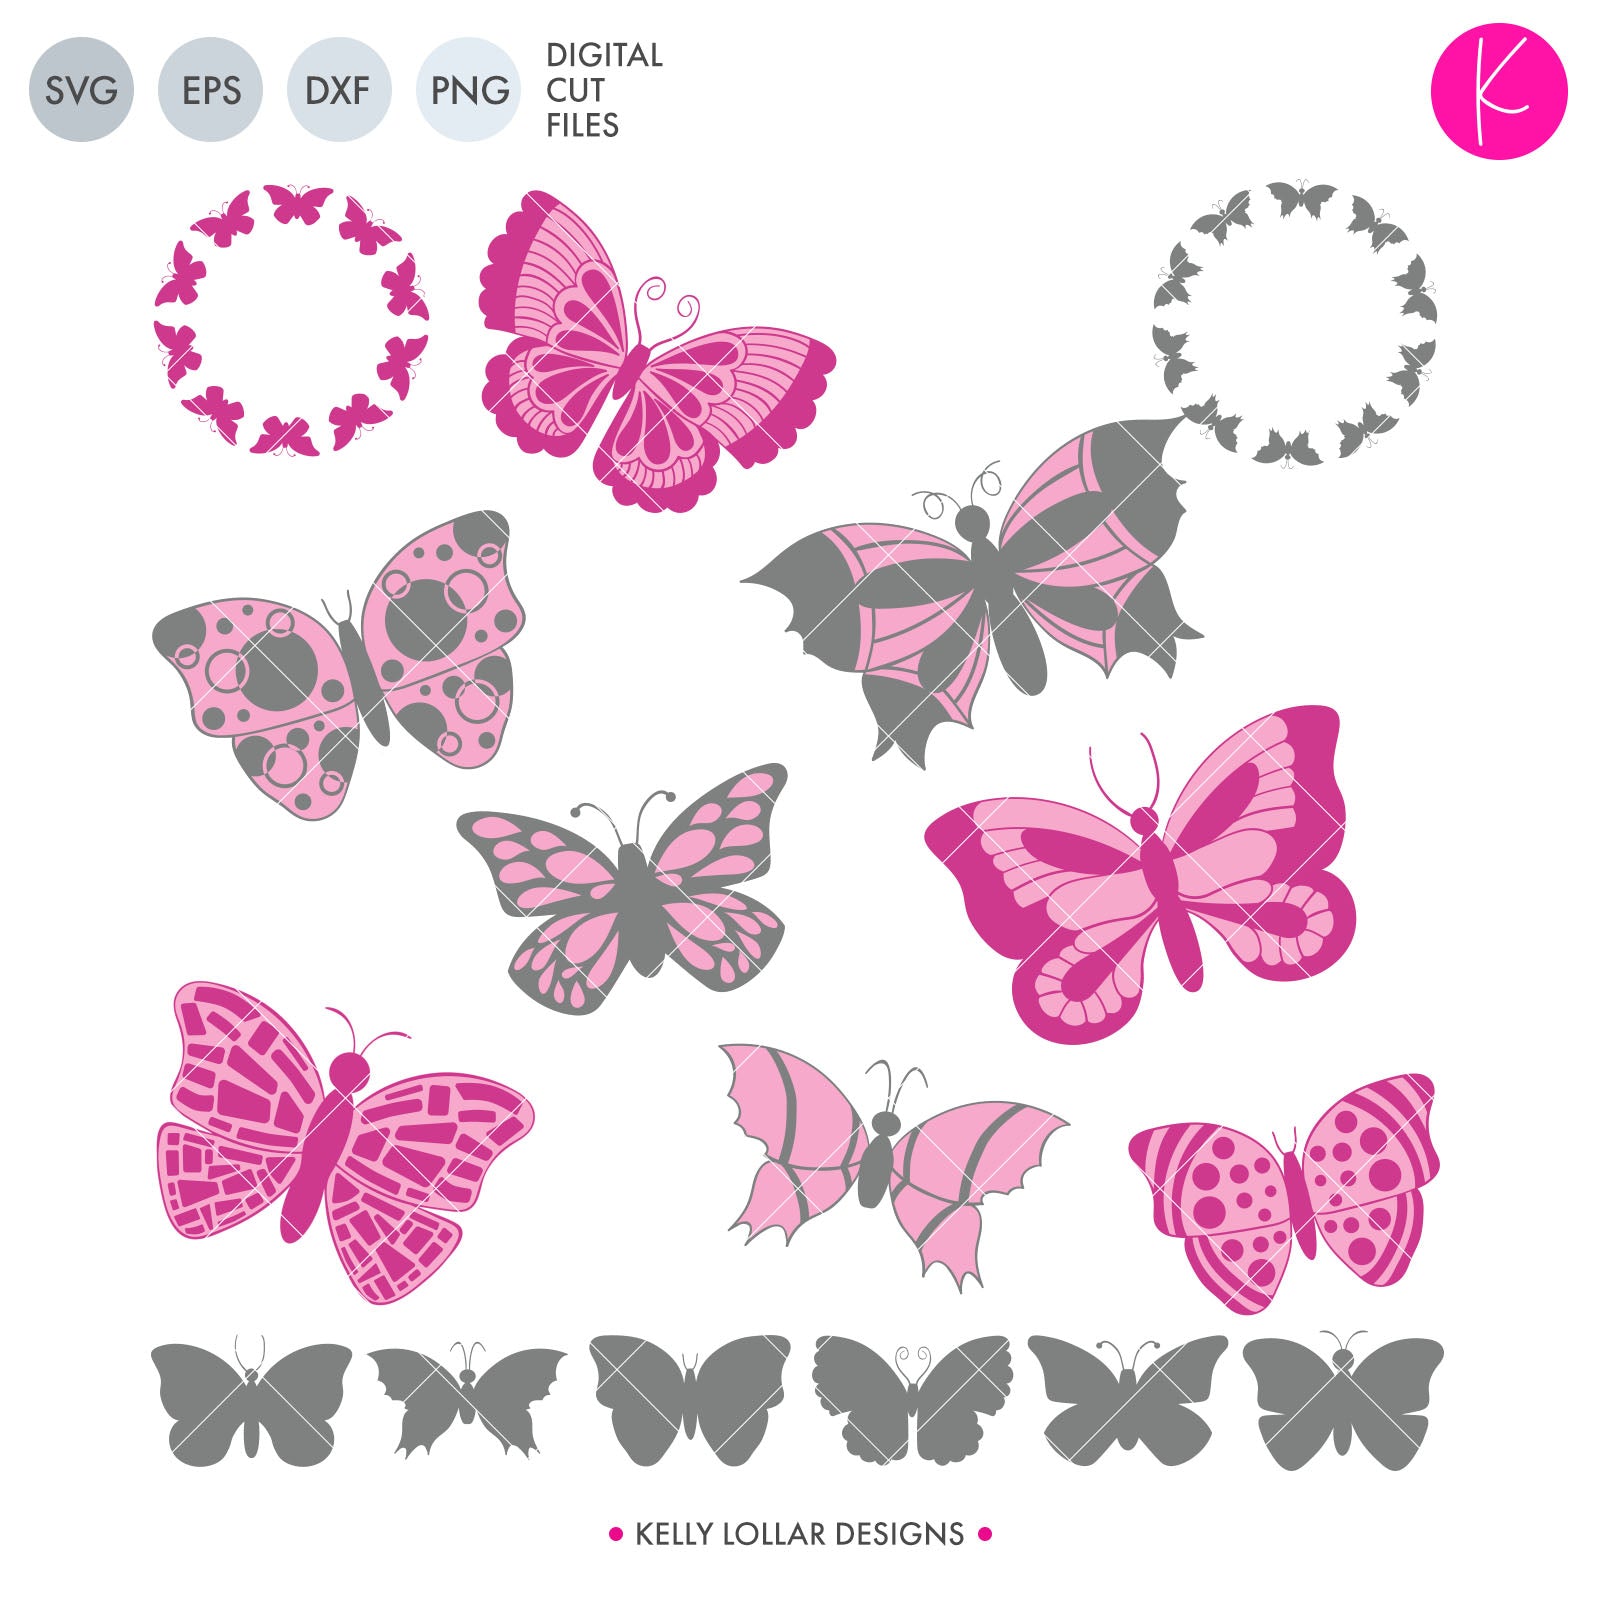 Butterfly SVG Files - 16 piece pack | Kelly Lollar Designs